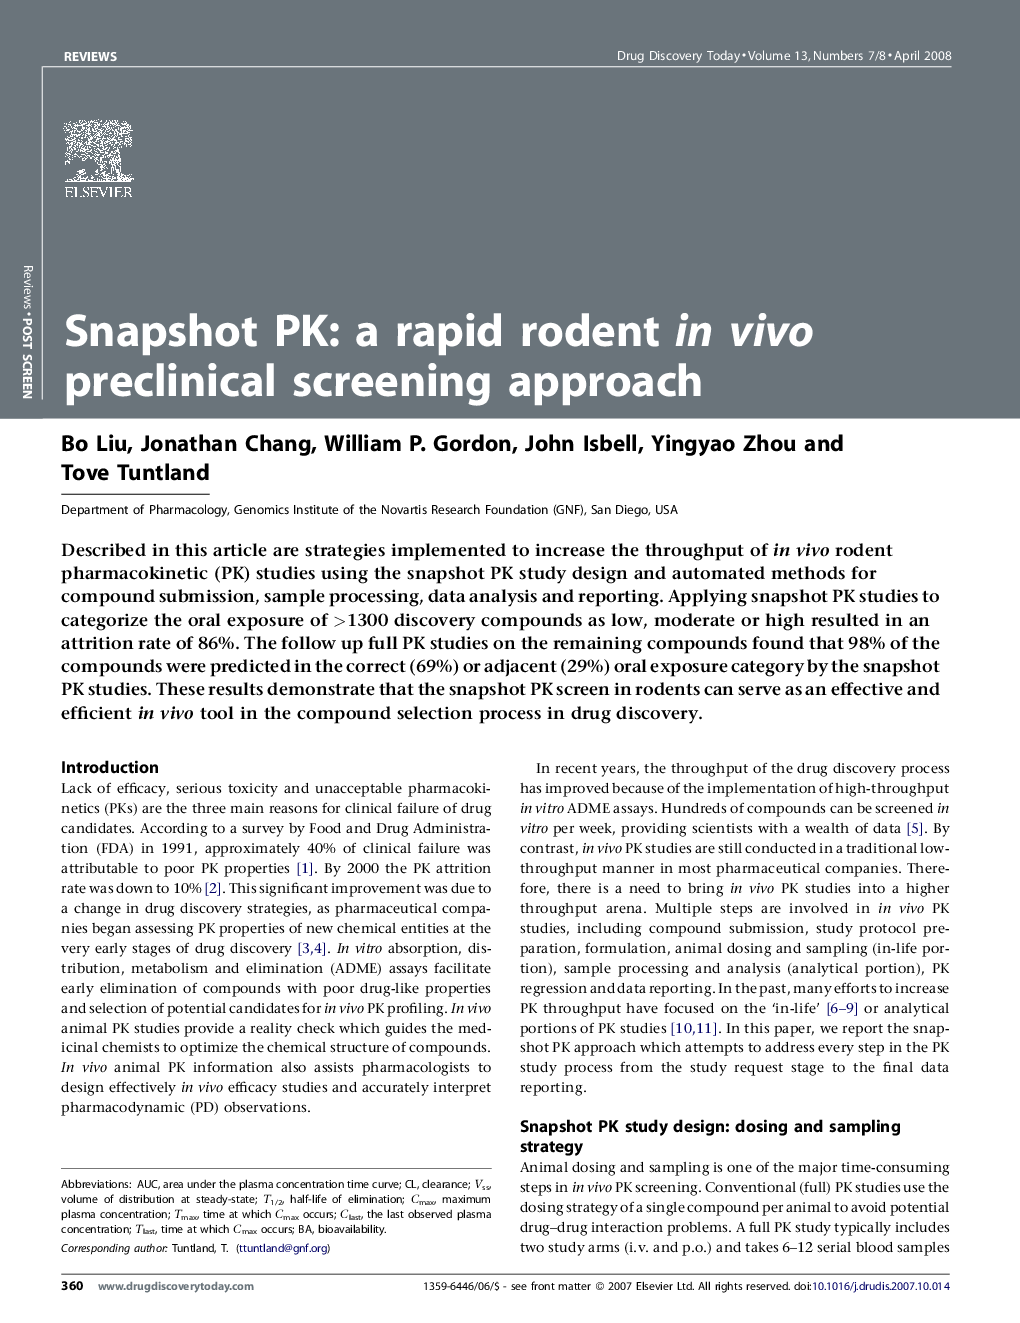 Snapshot PK: a rapid rodent in vivo preclinical screening approach